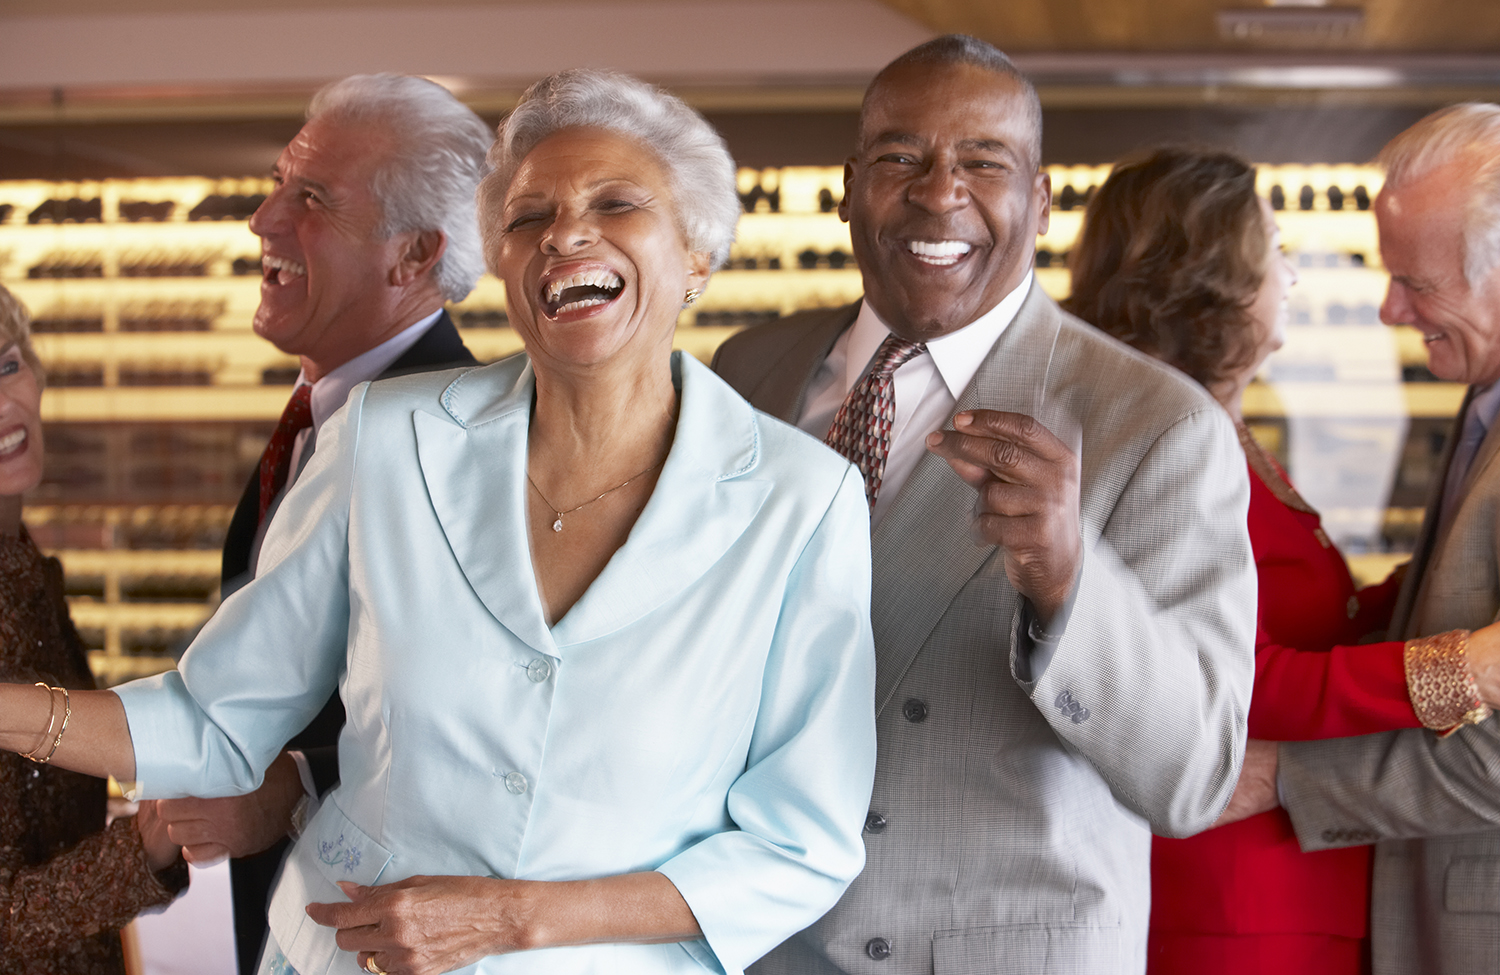 Photo of Couples Dancing Together including a laughing, smiling African American couple at center.